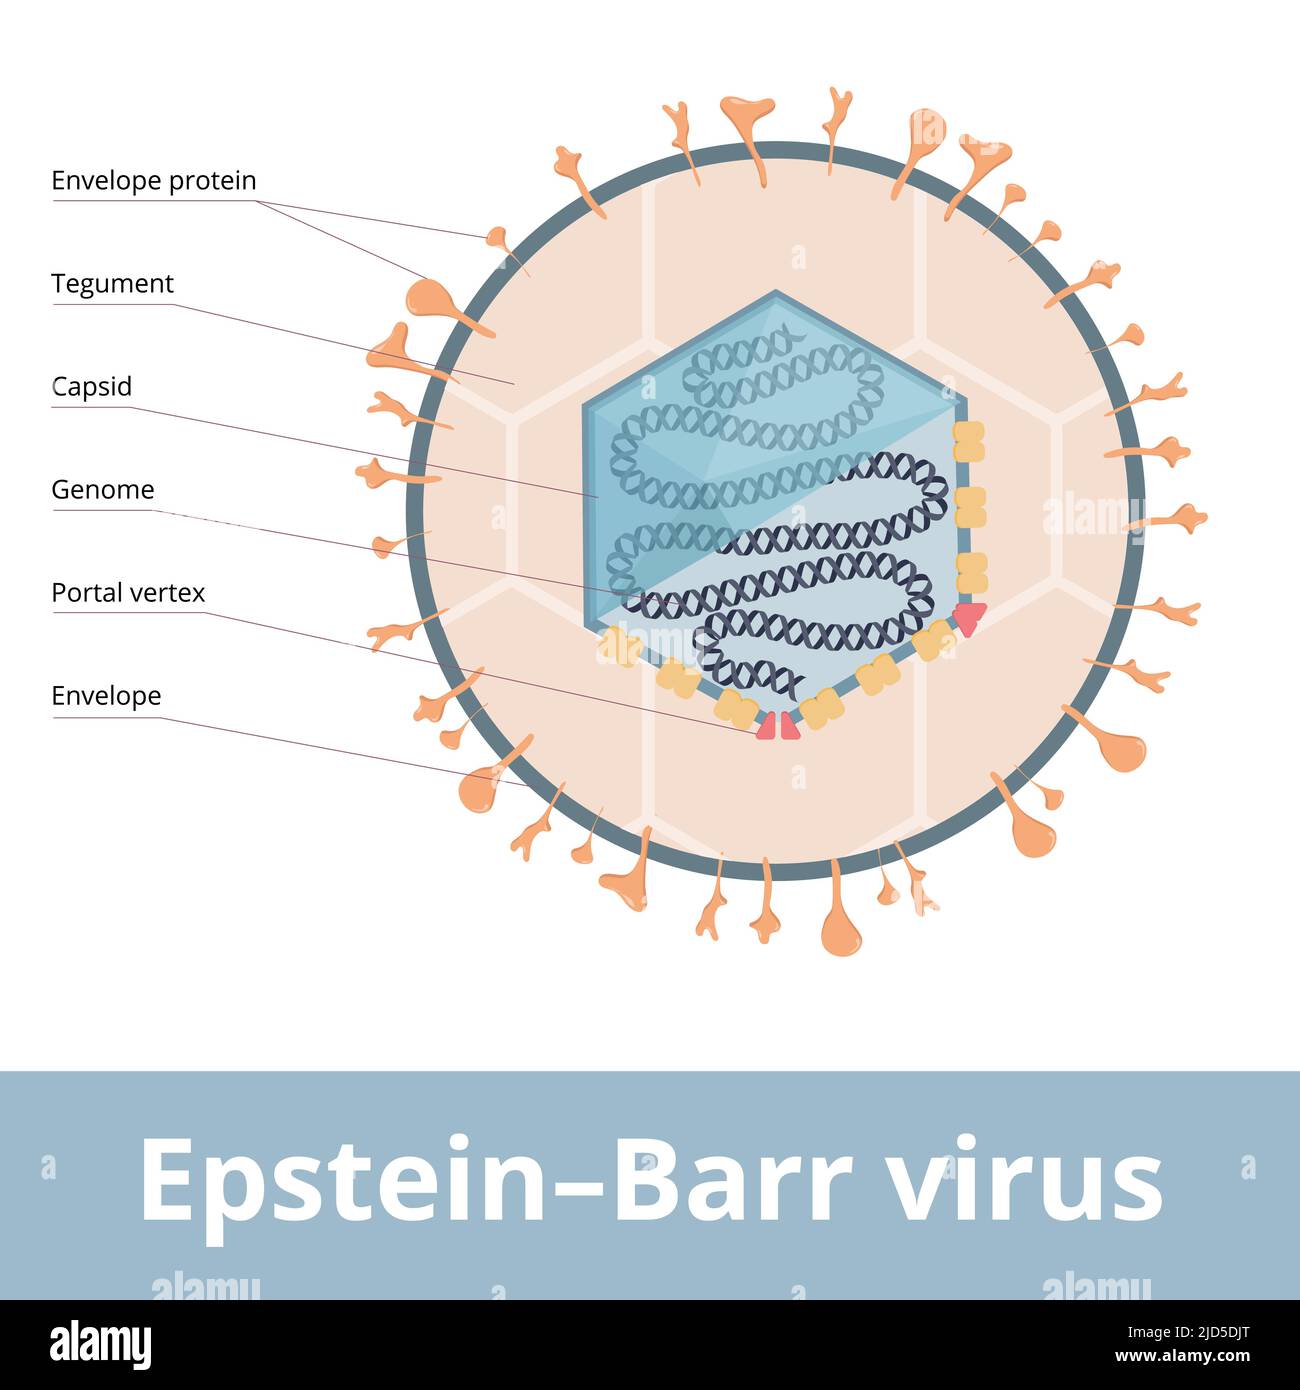 Epstein–Barr virus (EBV, Human gammaherpesvirus 4) known as the cause of infectious mononucleosis. Virion visualization includes genome, capsid. Stock Vector